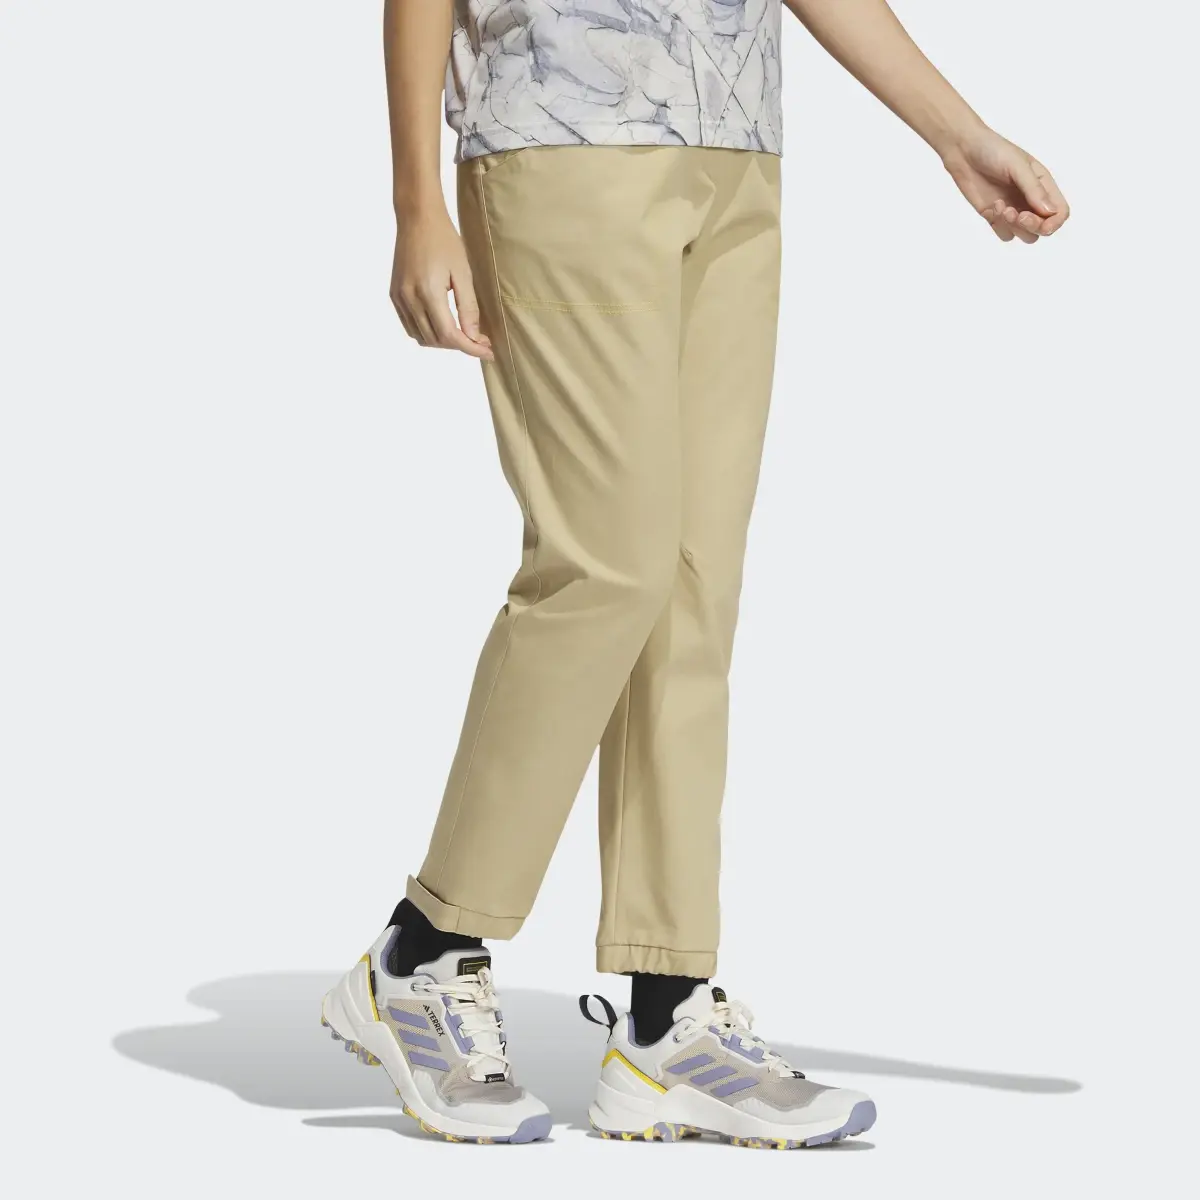 Adidas National Geographic Twill Trousers. 3